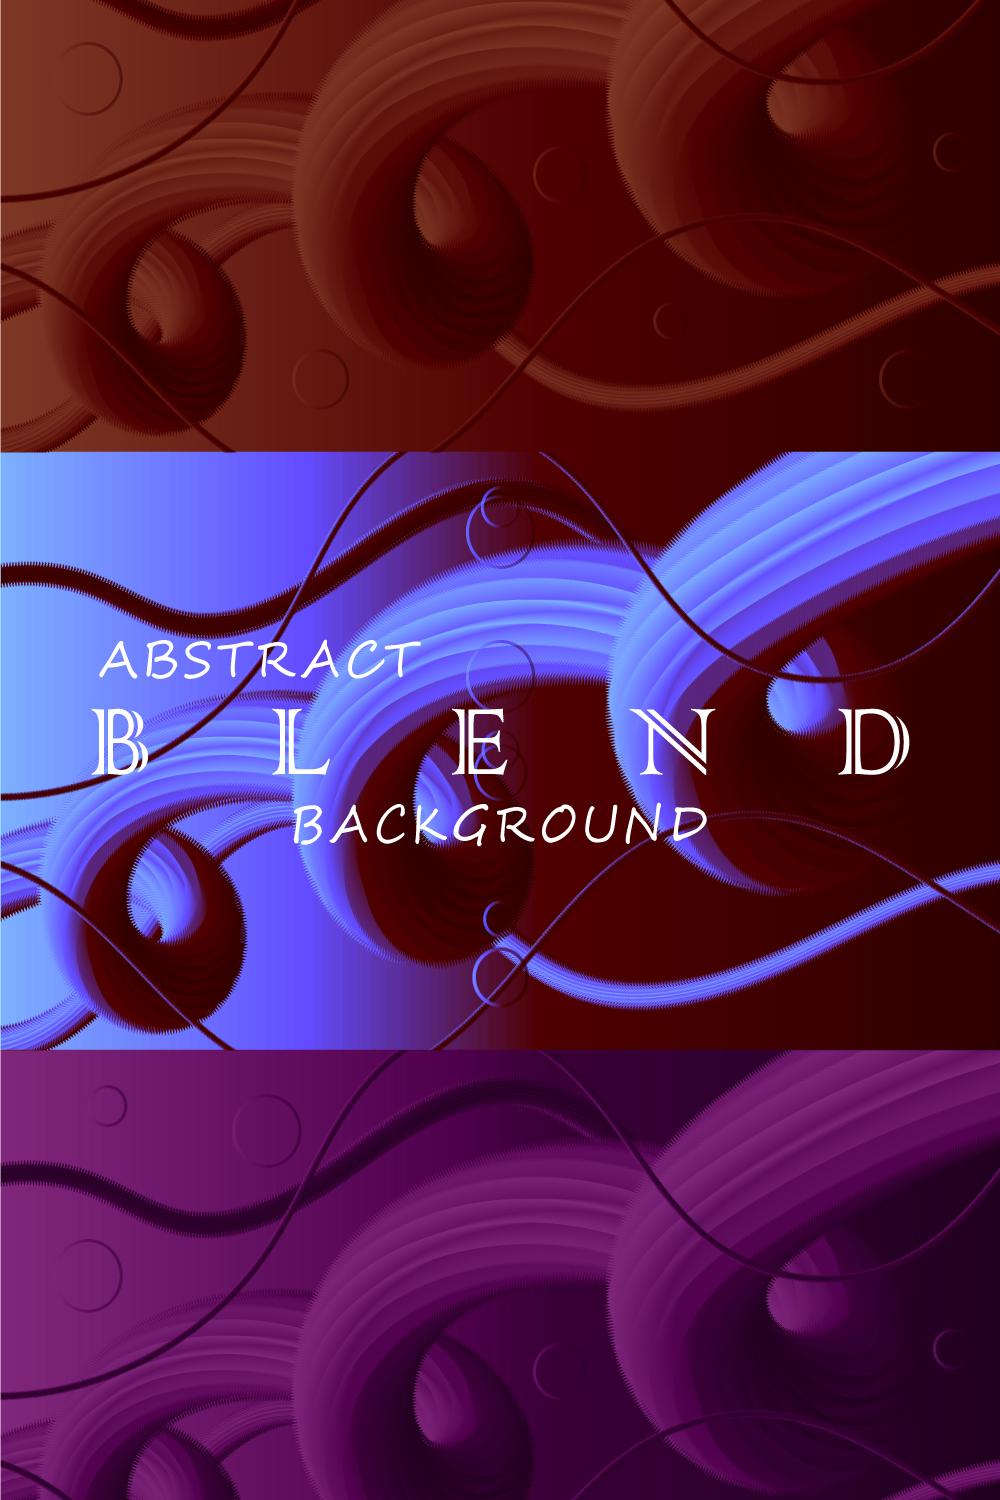 Abstract blend background with multi colors pinterest preview image.